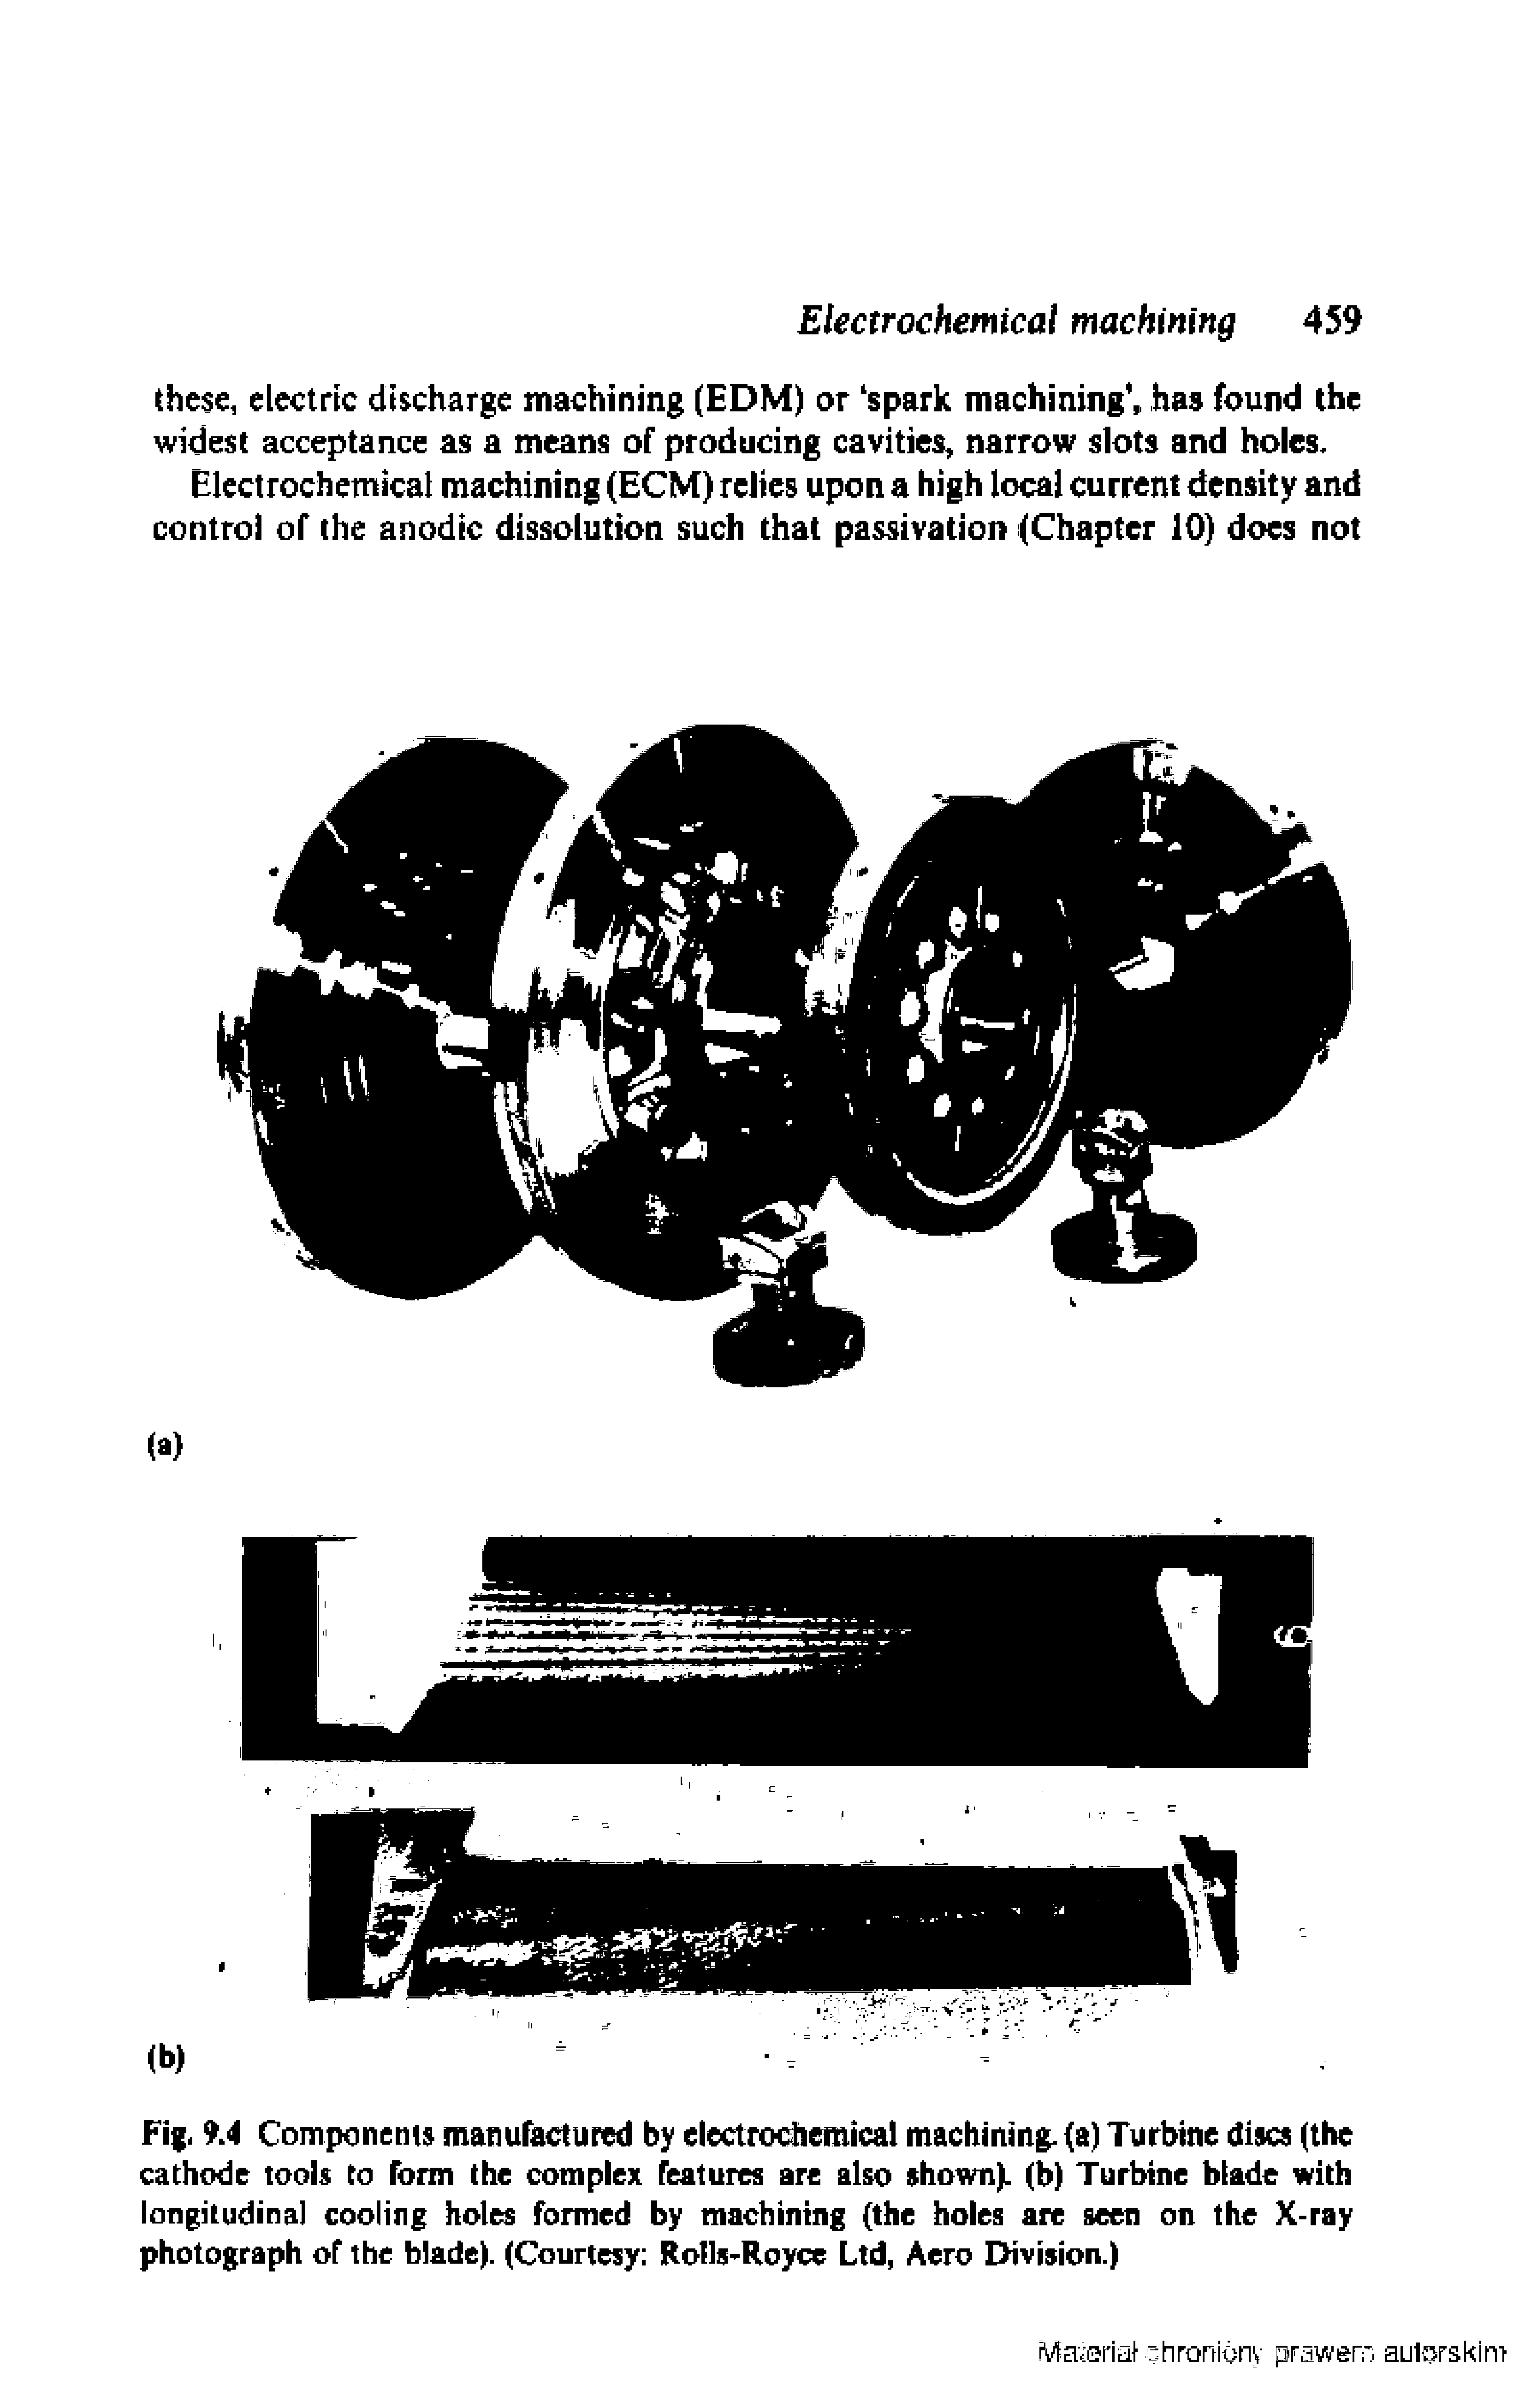 Fig. 9A Componetus manufactured by electrochemical machining, (a) Turbine discs (tbe cathode tools to form the complex features are also shown)L (b) Turbine blade with longitudinal cooling holes formed by machining (the holes arc seen on the X-ray photograph of the blade). (Courtesy Rolls-Royce Ltd, Aero Division.)...